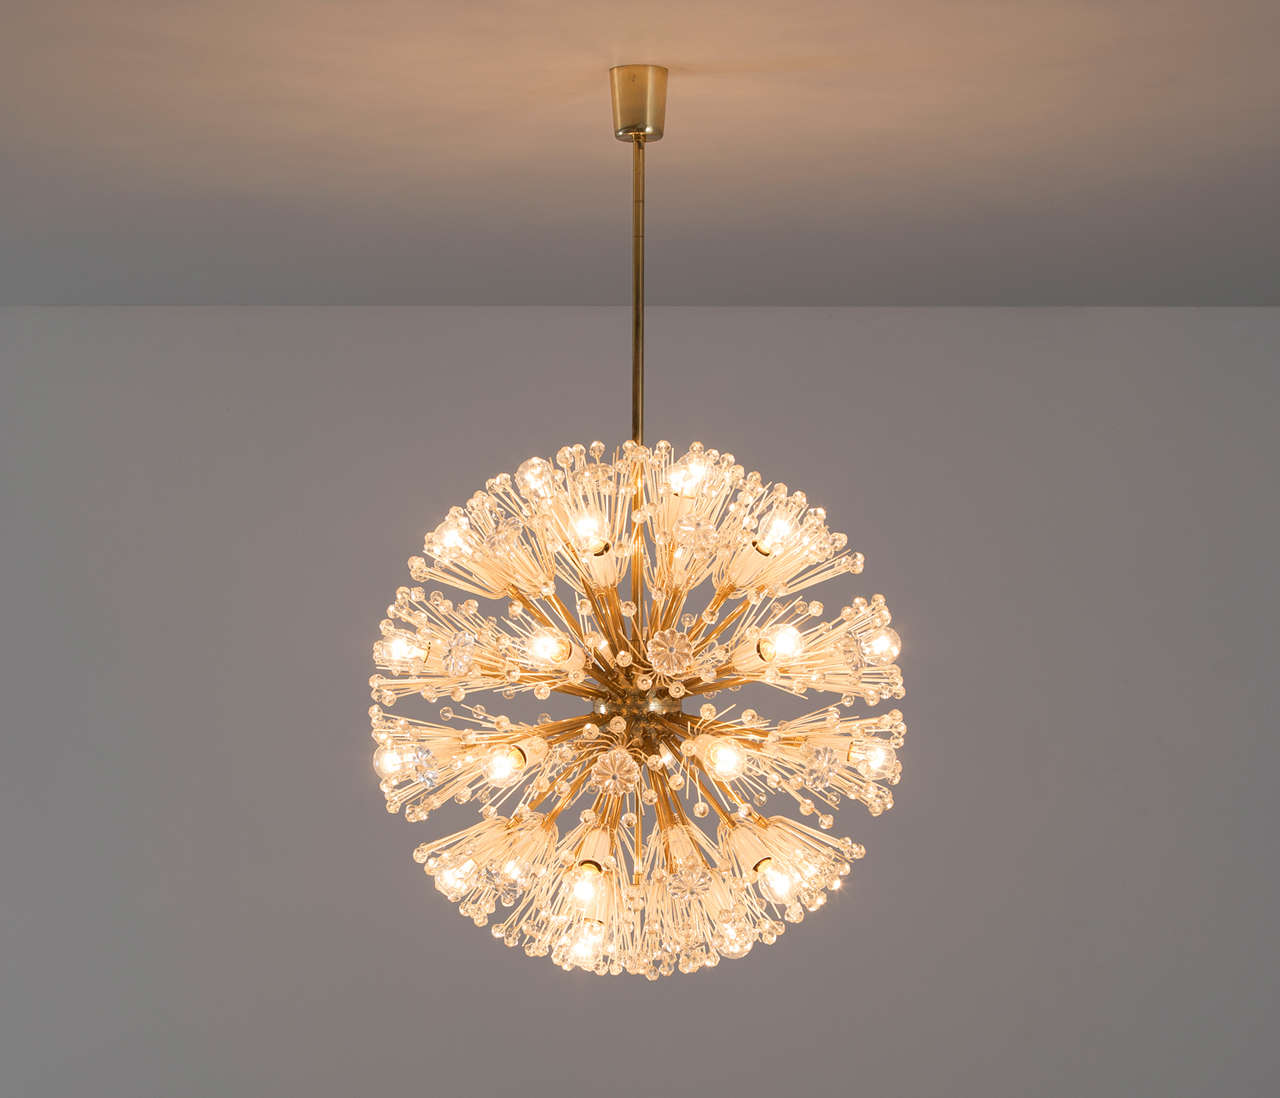 Emil Stejnar for Rupert Nikoll, sputnik chandelier, glass, crystal, brass, Austria 1950s

Large brass 'Snowball' Sputnik chandelier, made in Vienna in the 1960s. Designed by Emil Stejnar and manufactured by the famous Rupert Nikoll. This well known